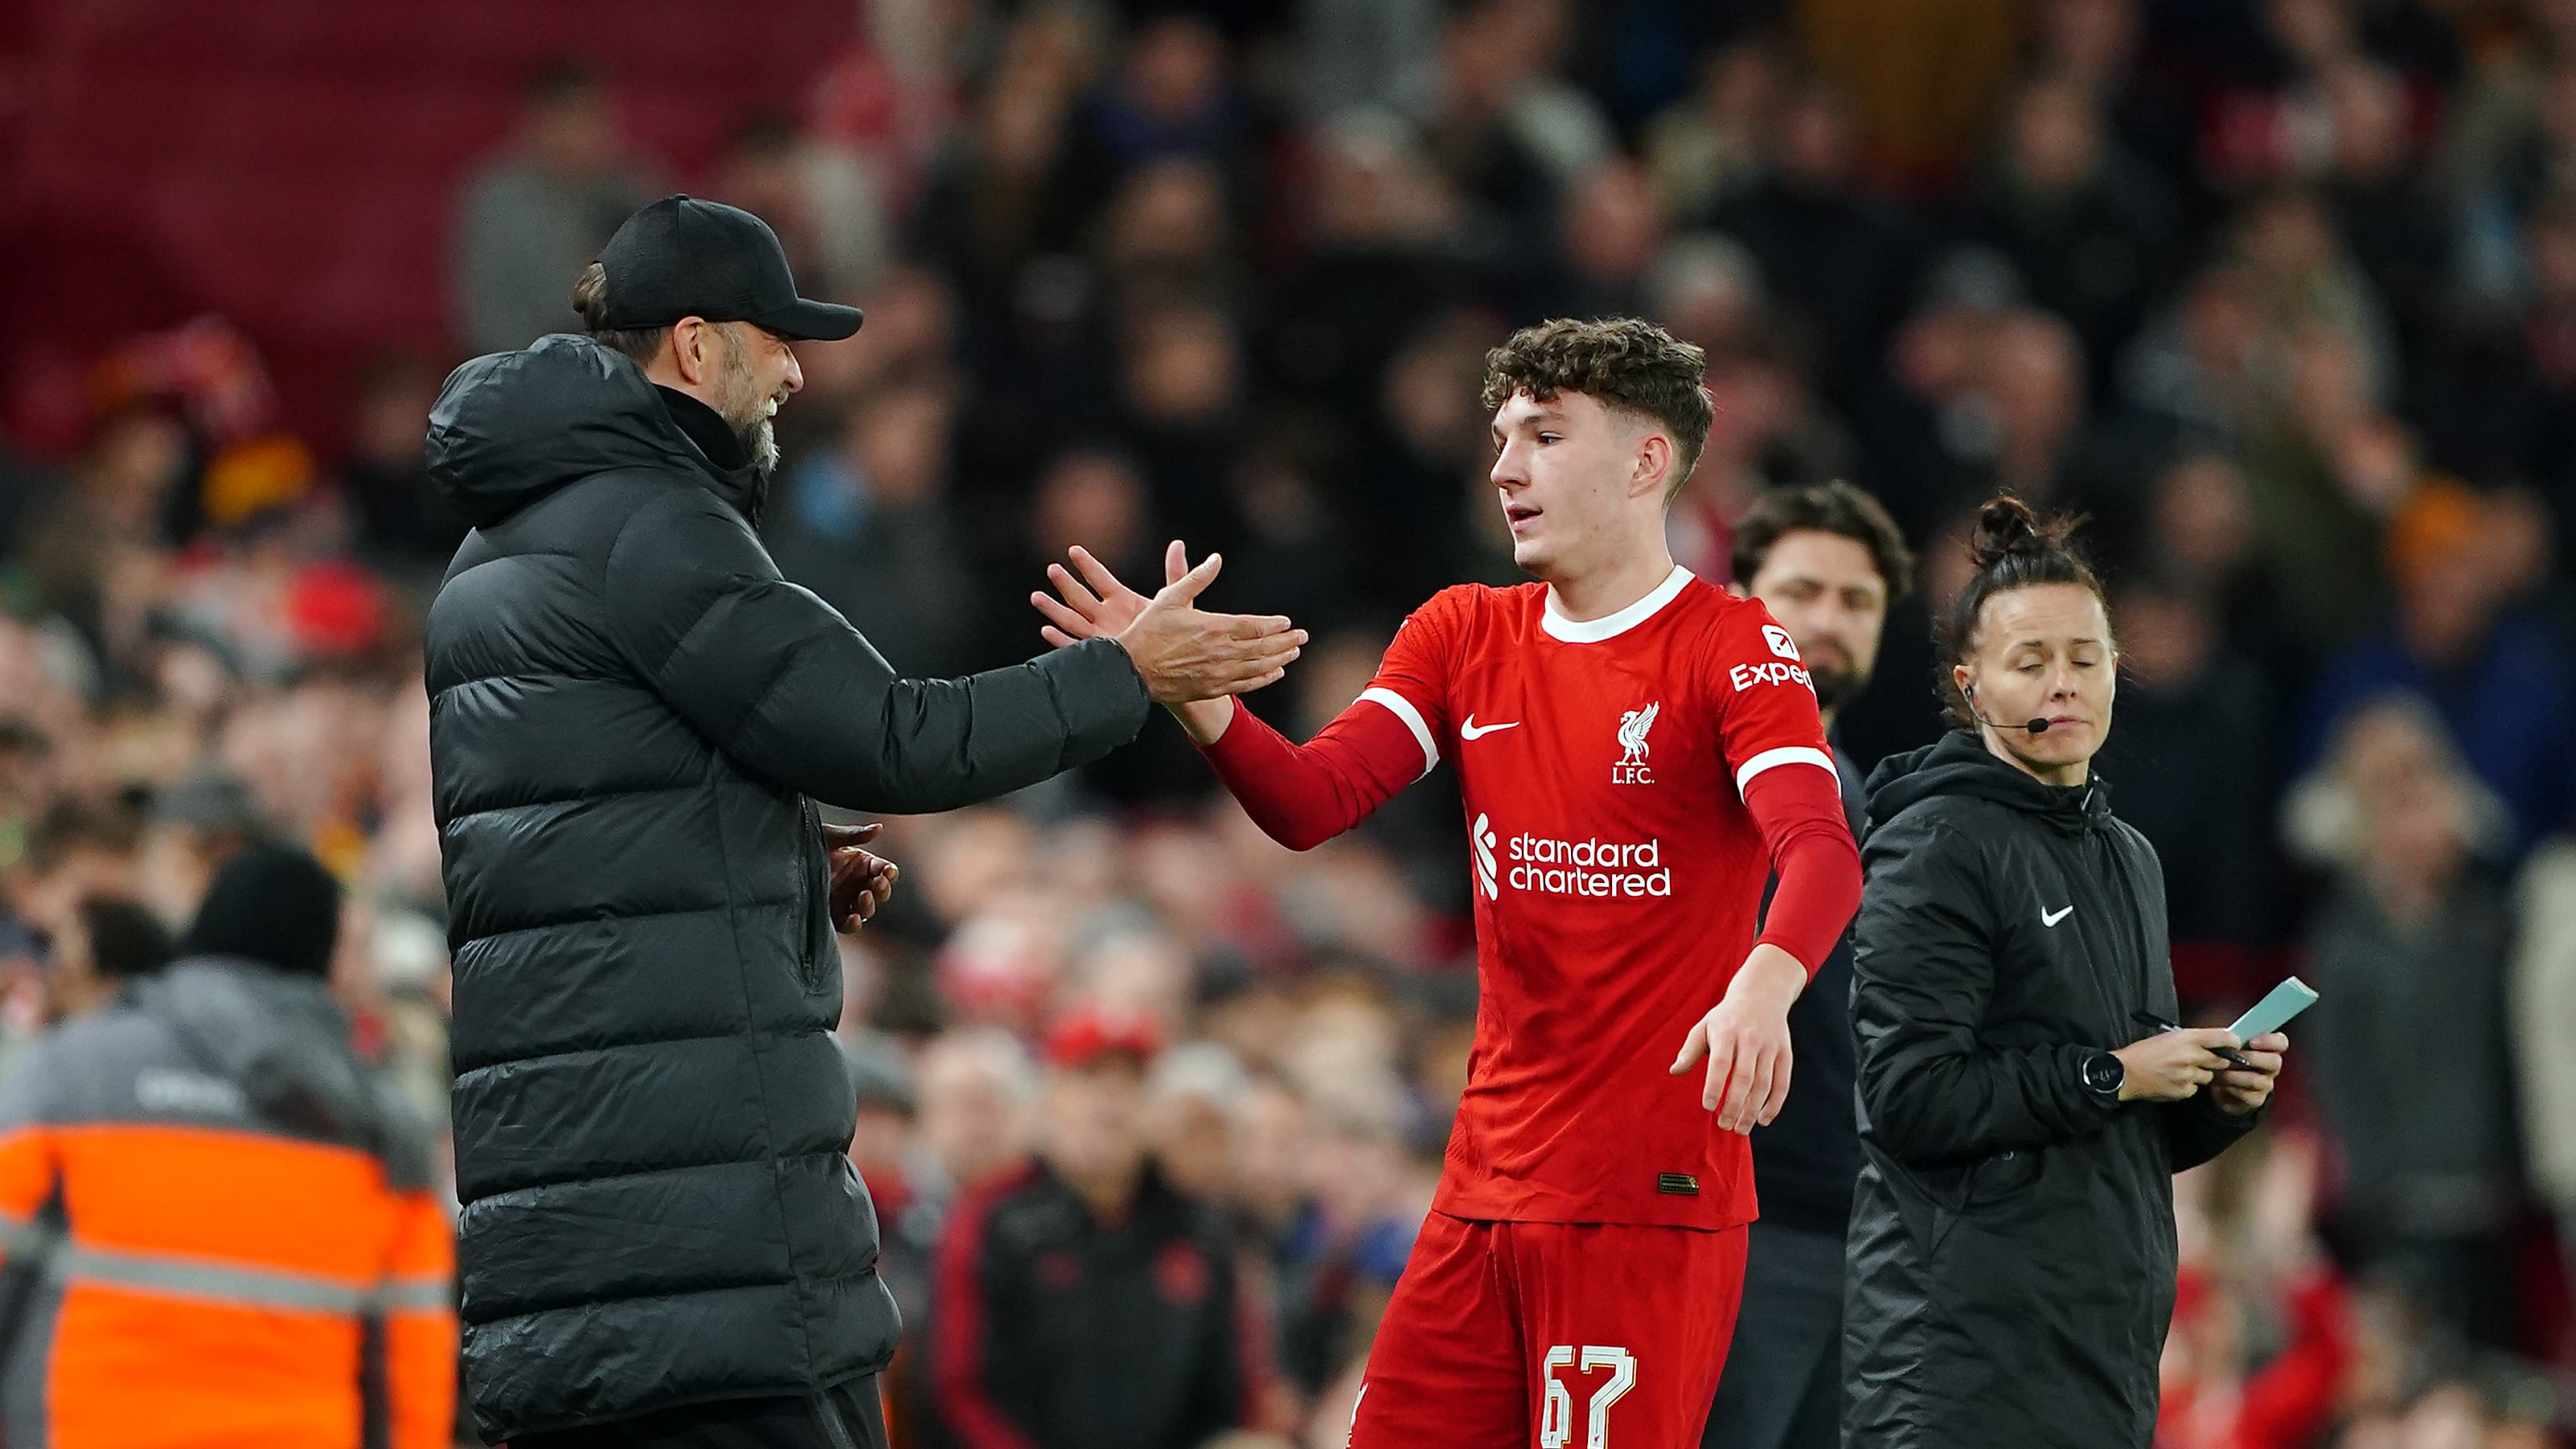 Lewis Koumas, pictured being congratulated by Jurgen Klopp after scoring on his Liverpool debut in February, is in line to win his first Wales cap next week